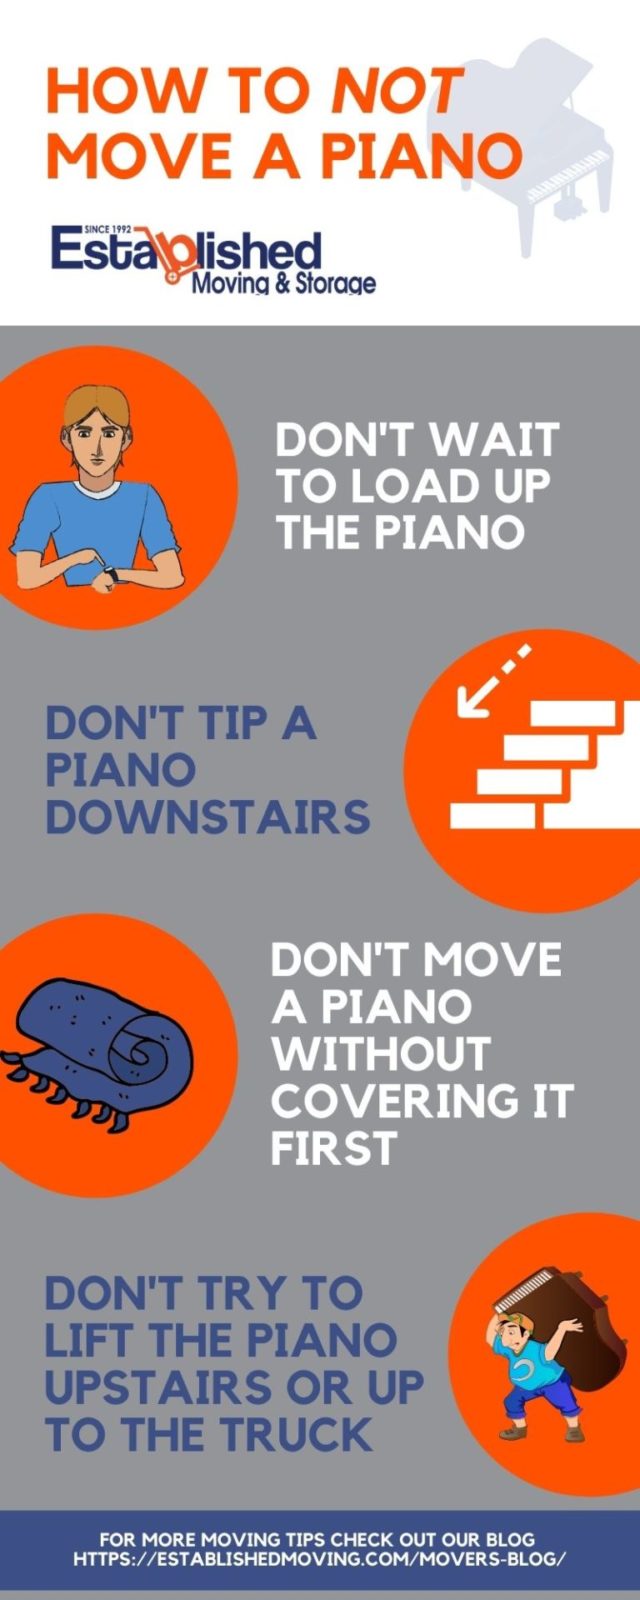 How to Not Move a Piano Infographic